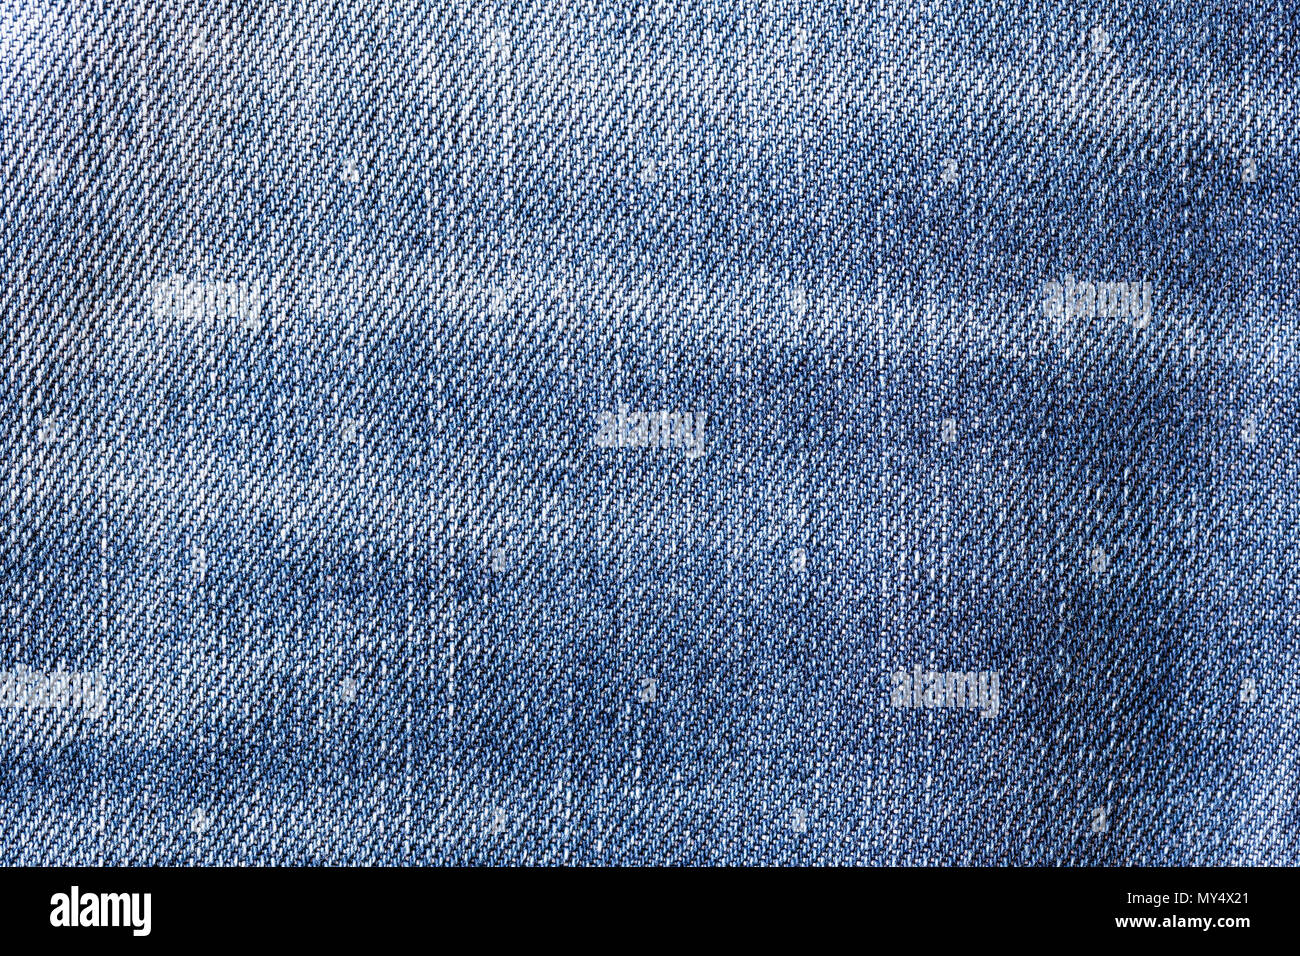 Denim jeans fabric texture background for clothing, fashion design and  industrial construction concept Stock Photo - Alamy